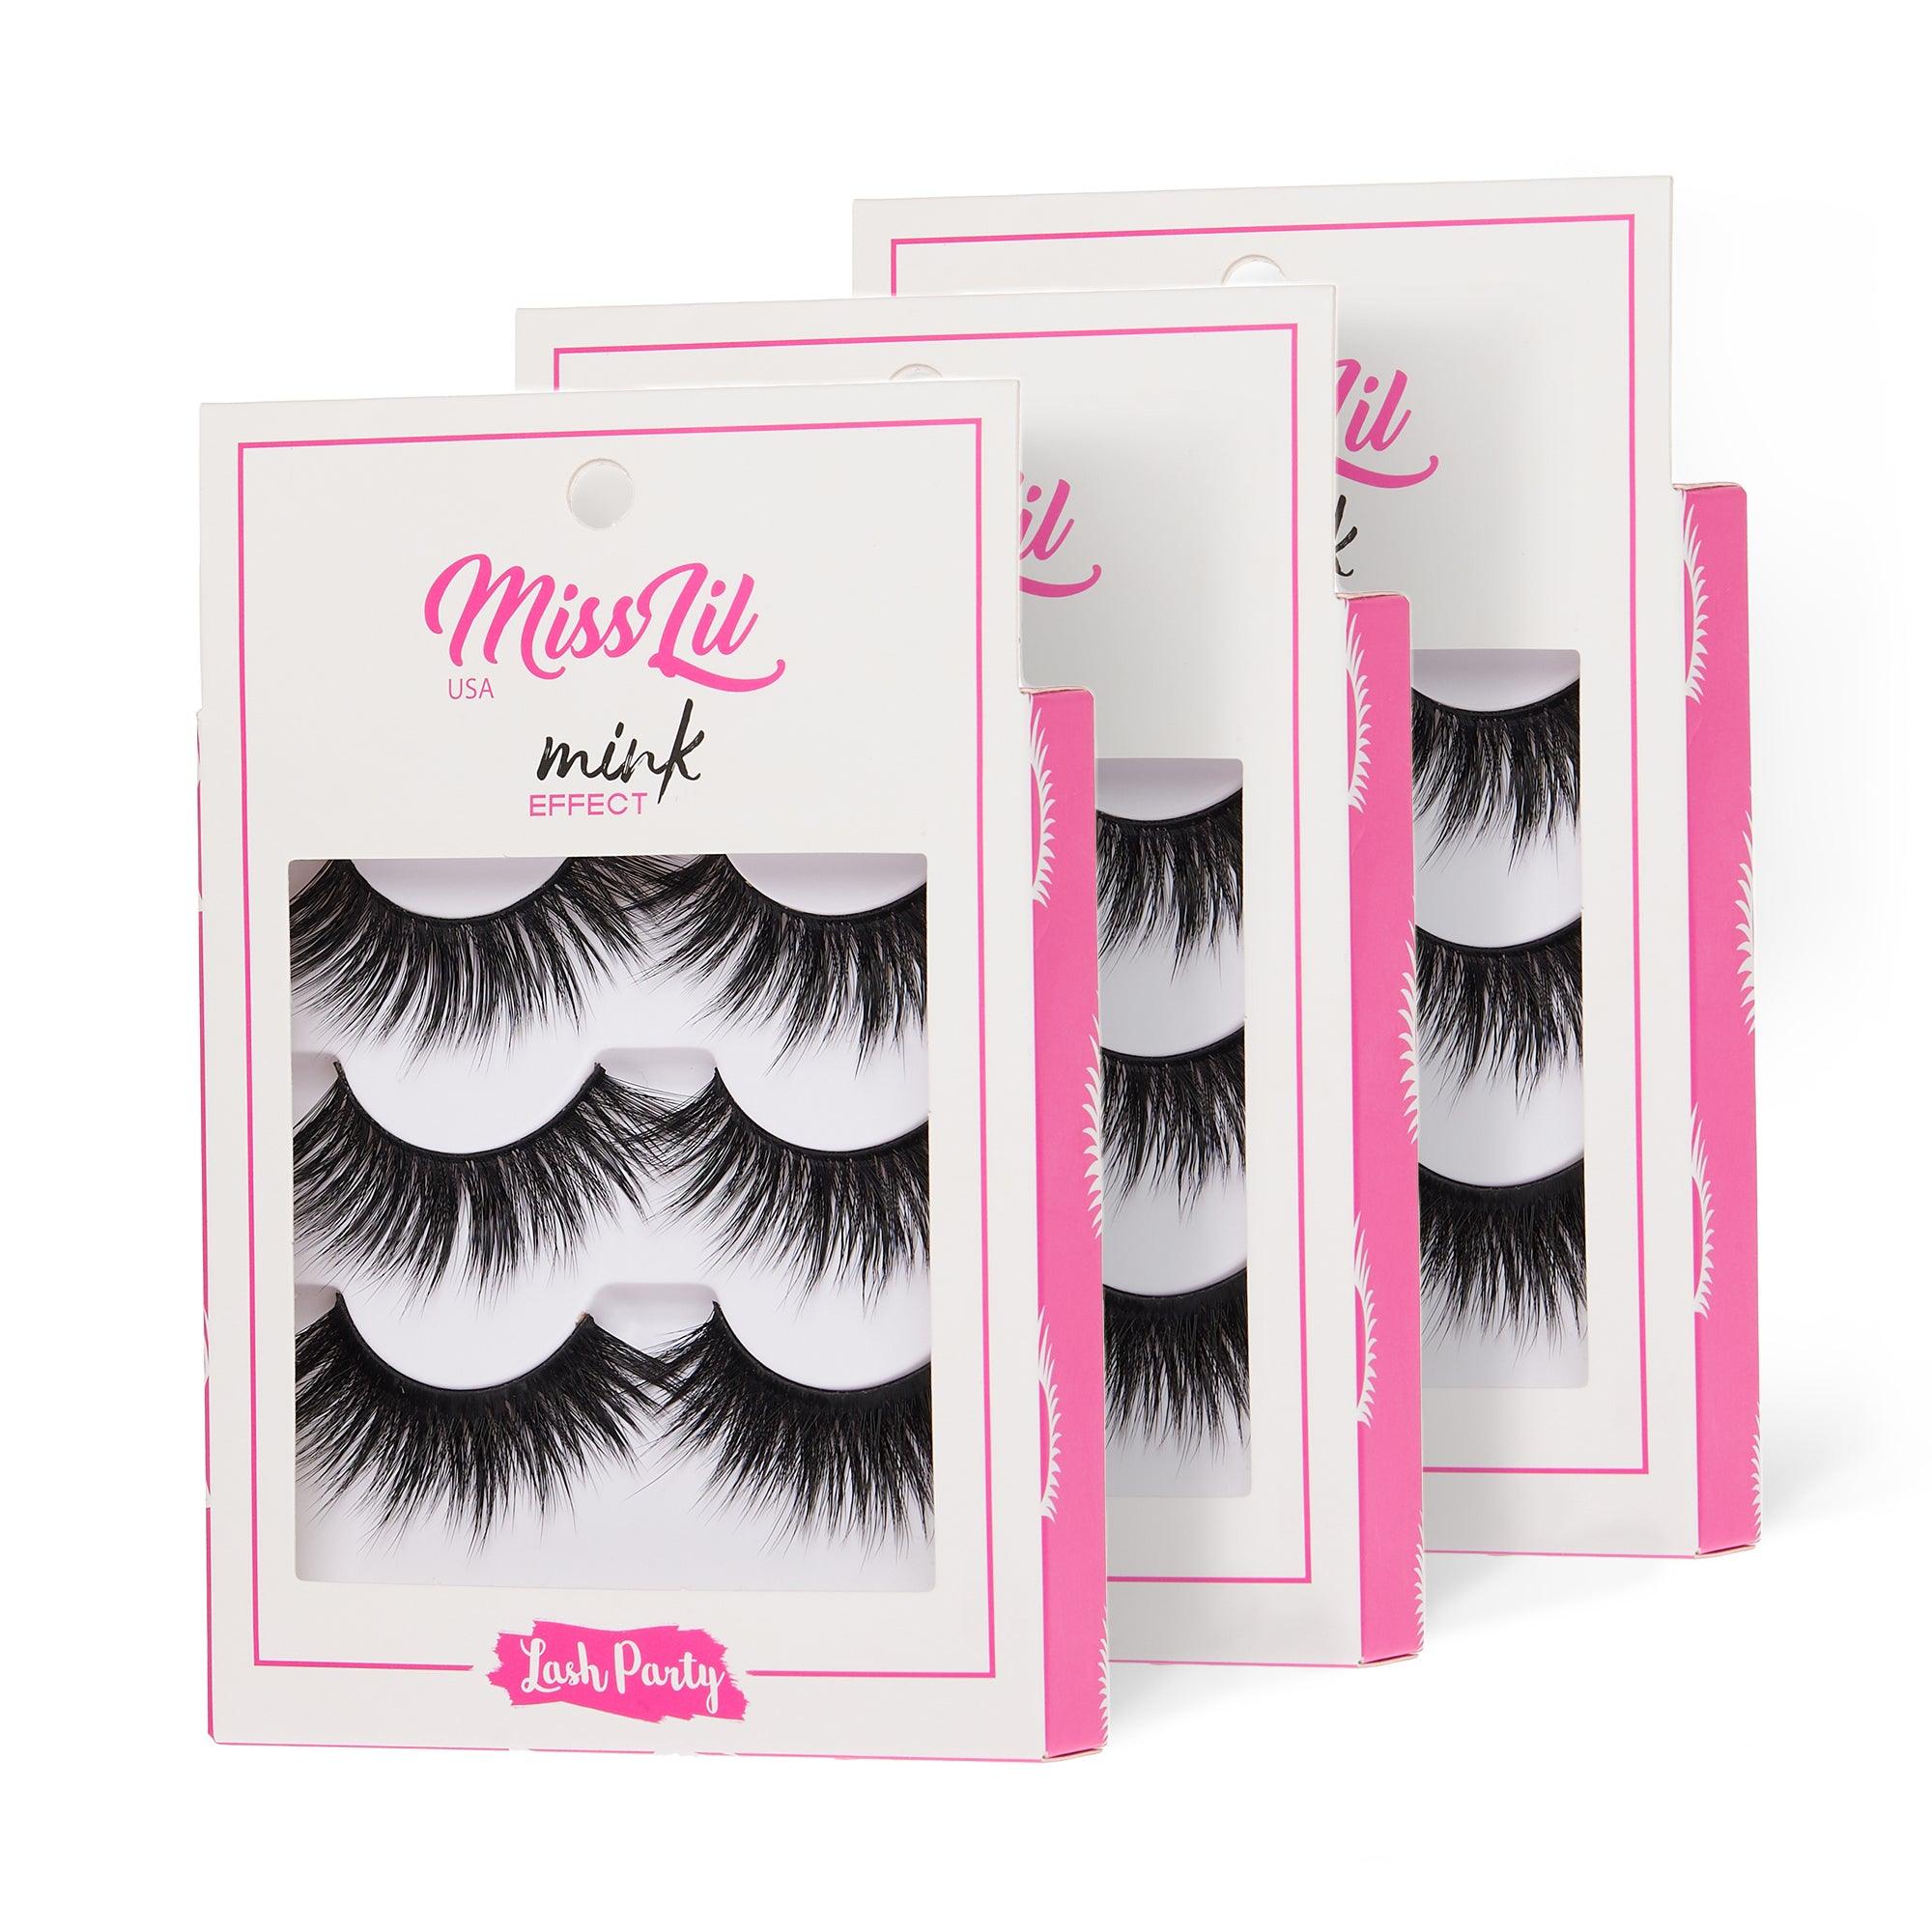 3-Pair Faux Mink Effect Eyelashes - Lash Party Collection #24 - Pack of 3 - Miss Lil USA